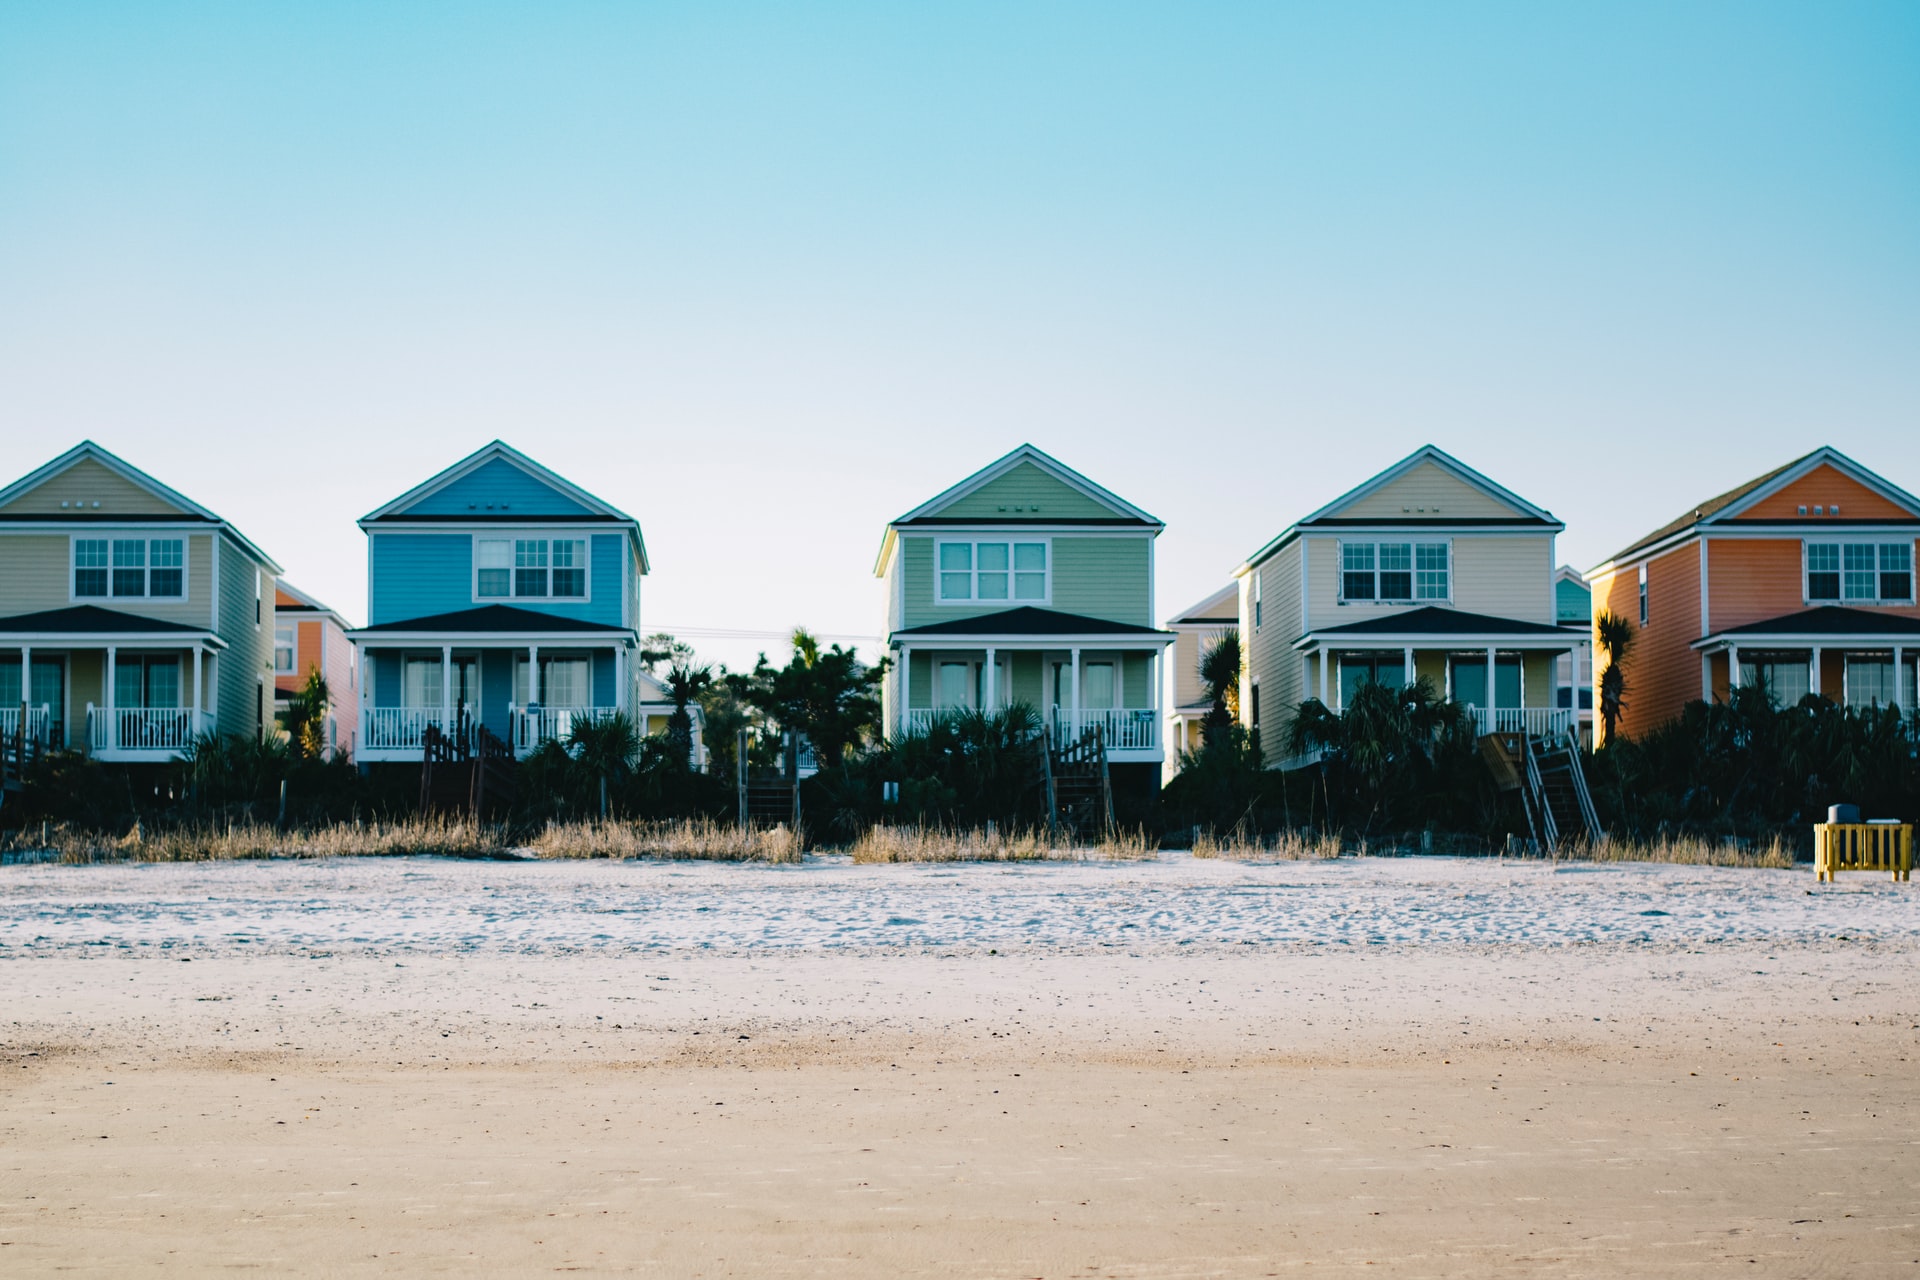 Top Features to Make Your Vacation Rental More Marketable